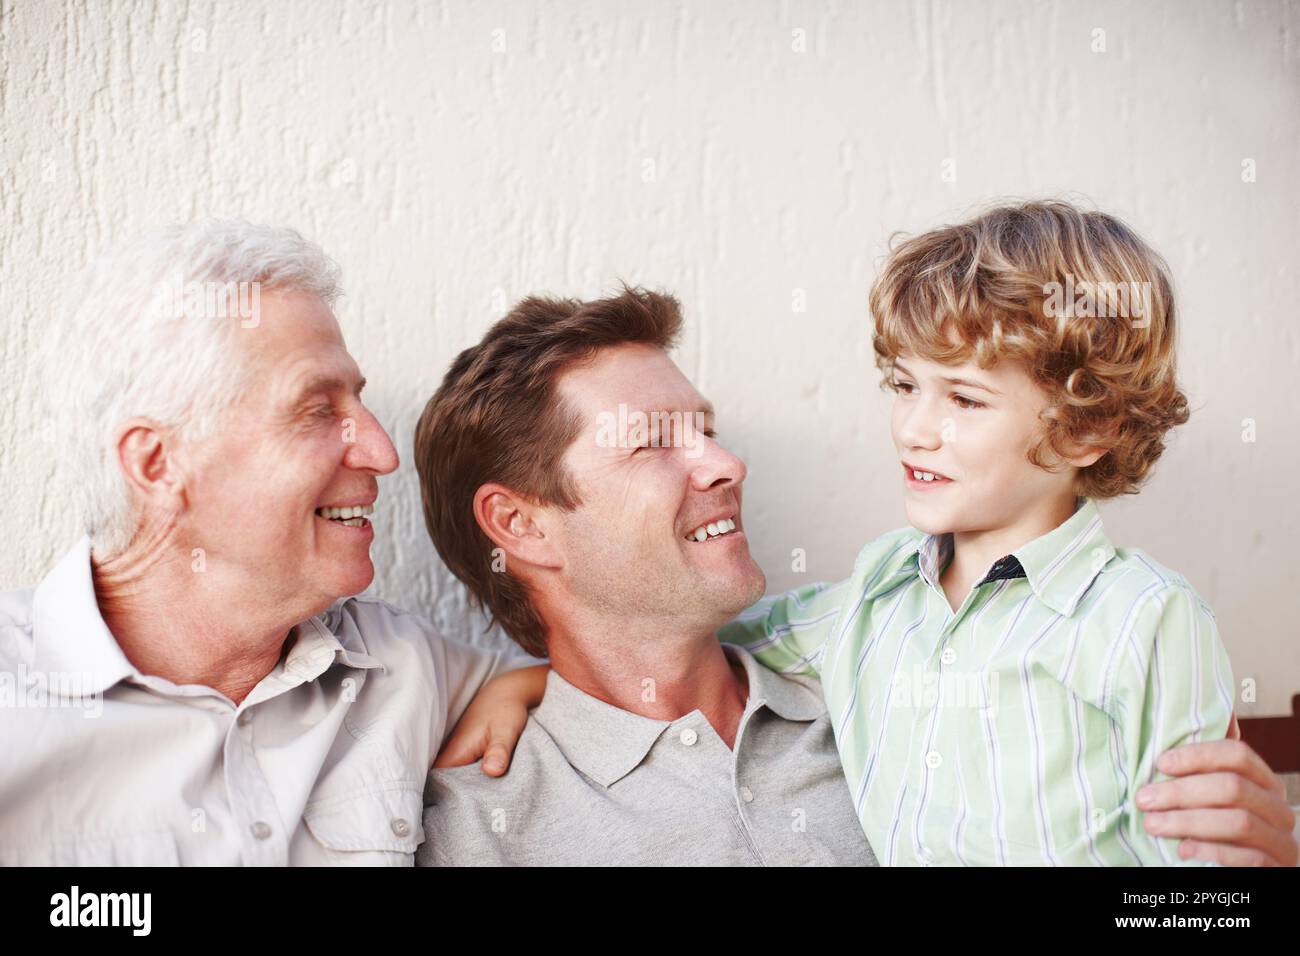 He brings them so much joy. a handsome man sitting with his father and his son. Stock Photo